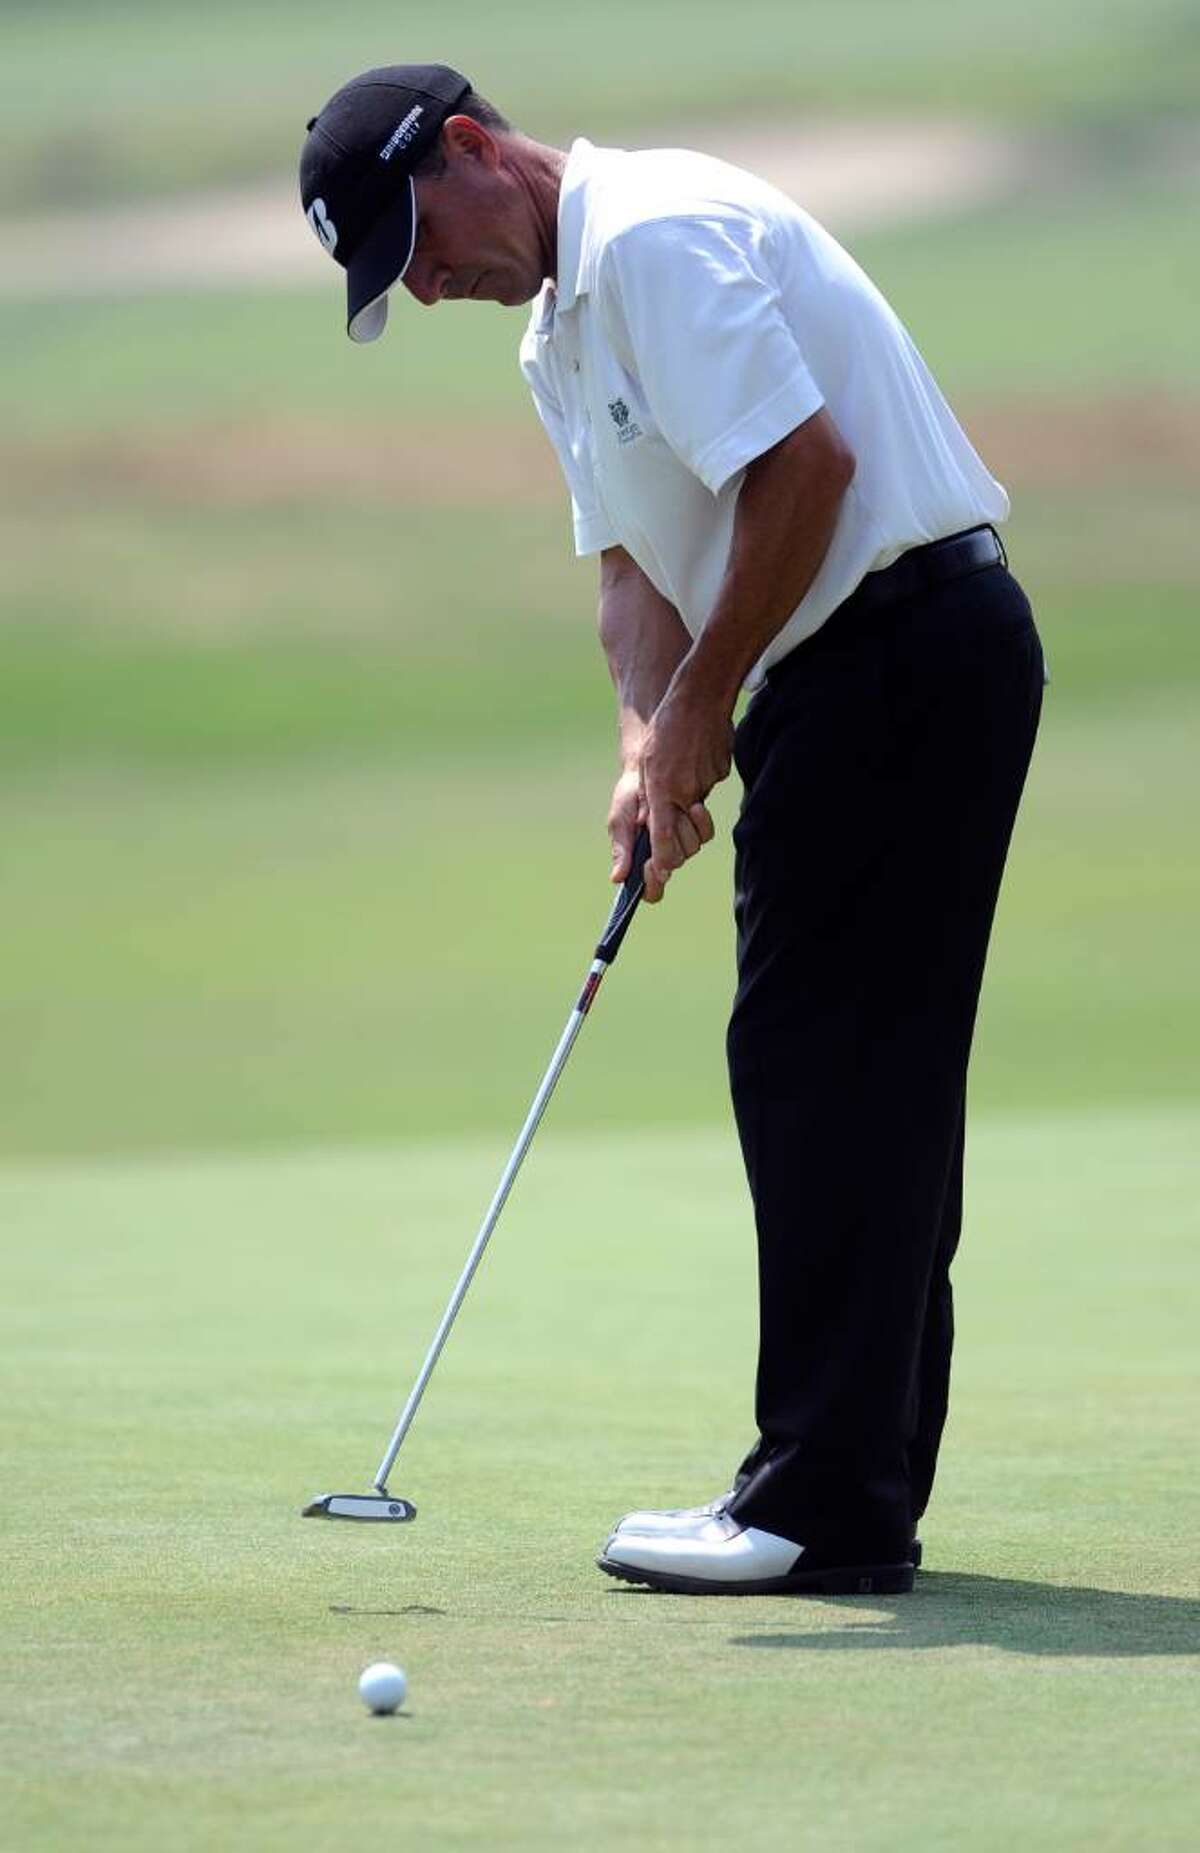 Bobby Gage competes in the Connecticut Open golf tournament at the Country Club of Fairfield on Wednesday, July 28, 2010.